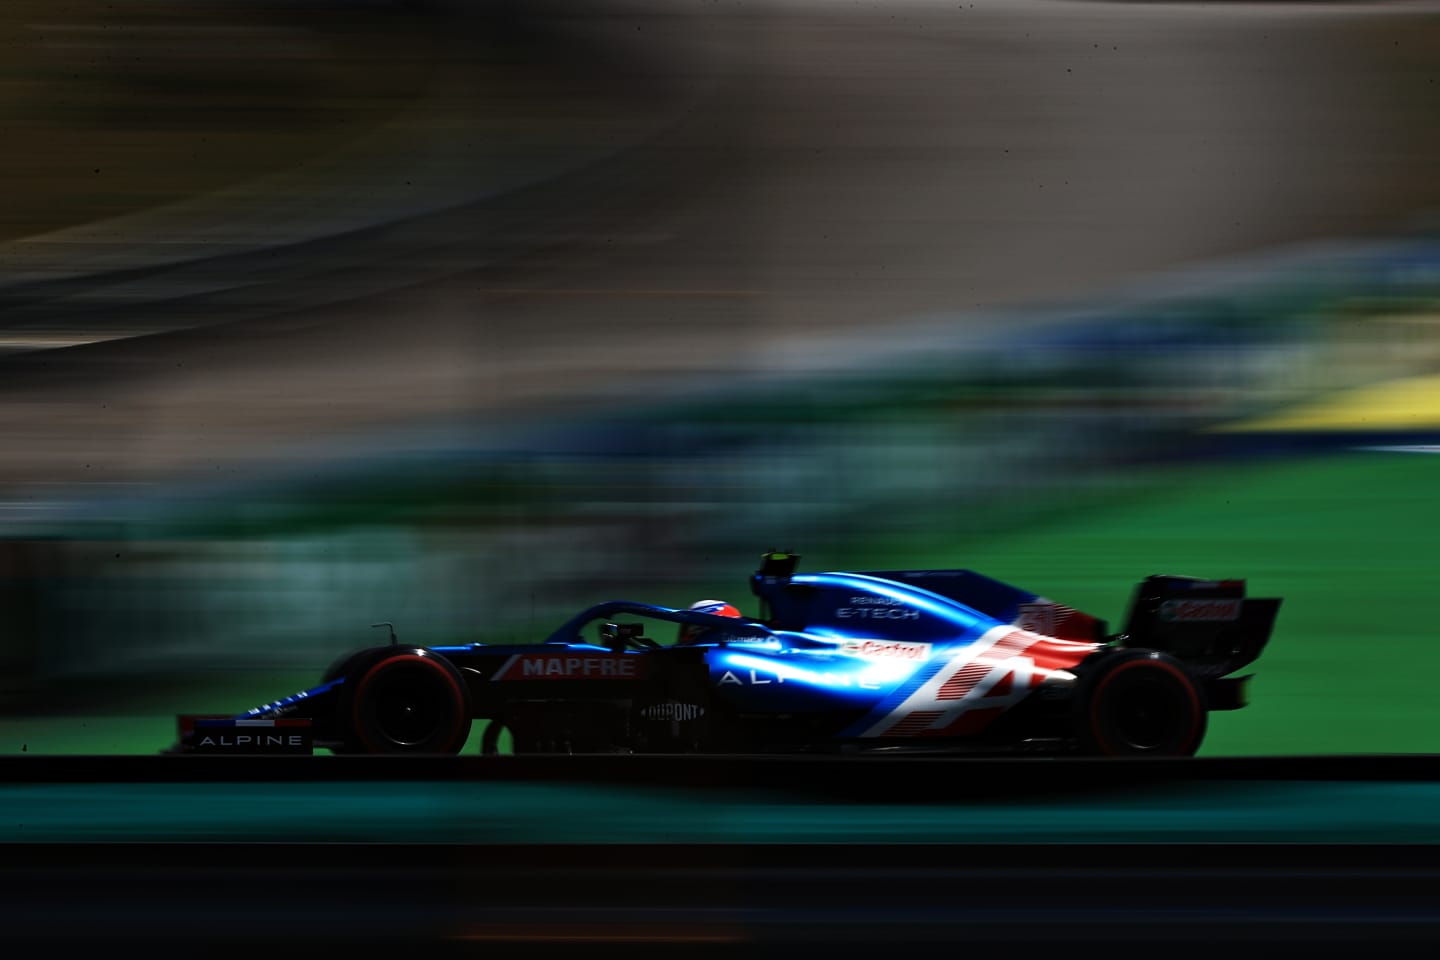 SAO PAULO, BRAZIL - NOVEMBER 13: Esteban Ocon of France driving the (31) Alpine A521 Renault during practice ahead of the F1 Grand Prix of Brazil at Autodromo Jose Carlos Pace on November 13, 2021 in Sao Paulo, Brazil. (Photo by Buda Mendes/Getty Images)